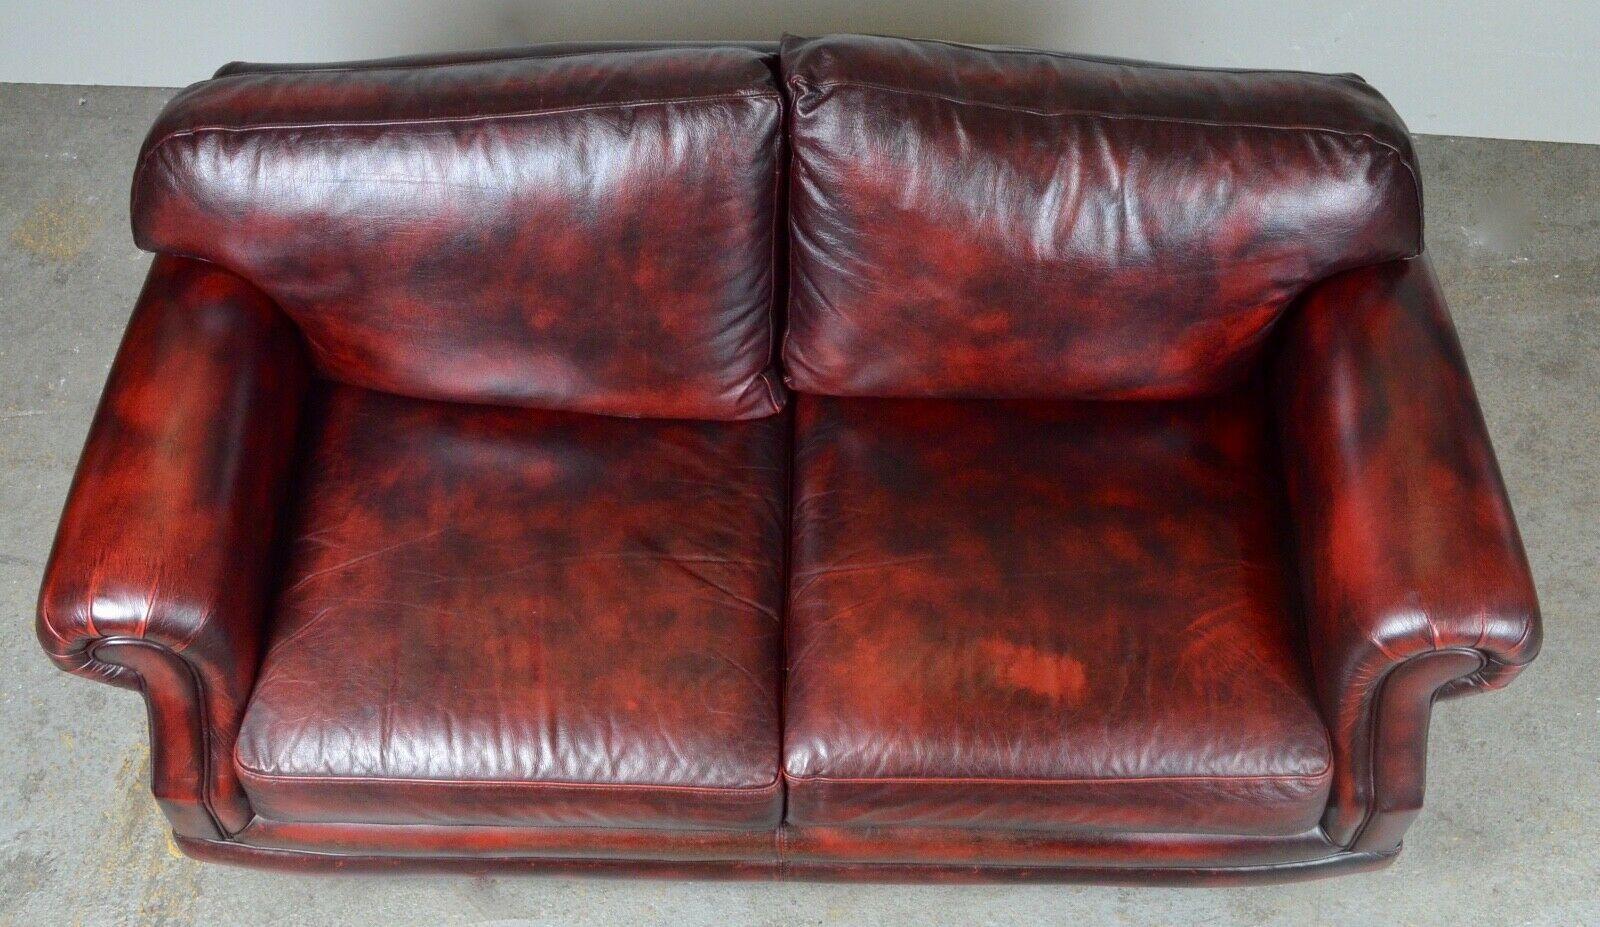 Art Deco Vintage Thomas Lloyd Red Oxblood Leather 2 Seater Sofa / Armchair's Available